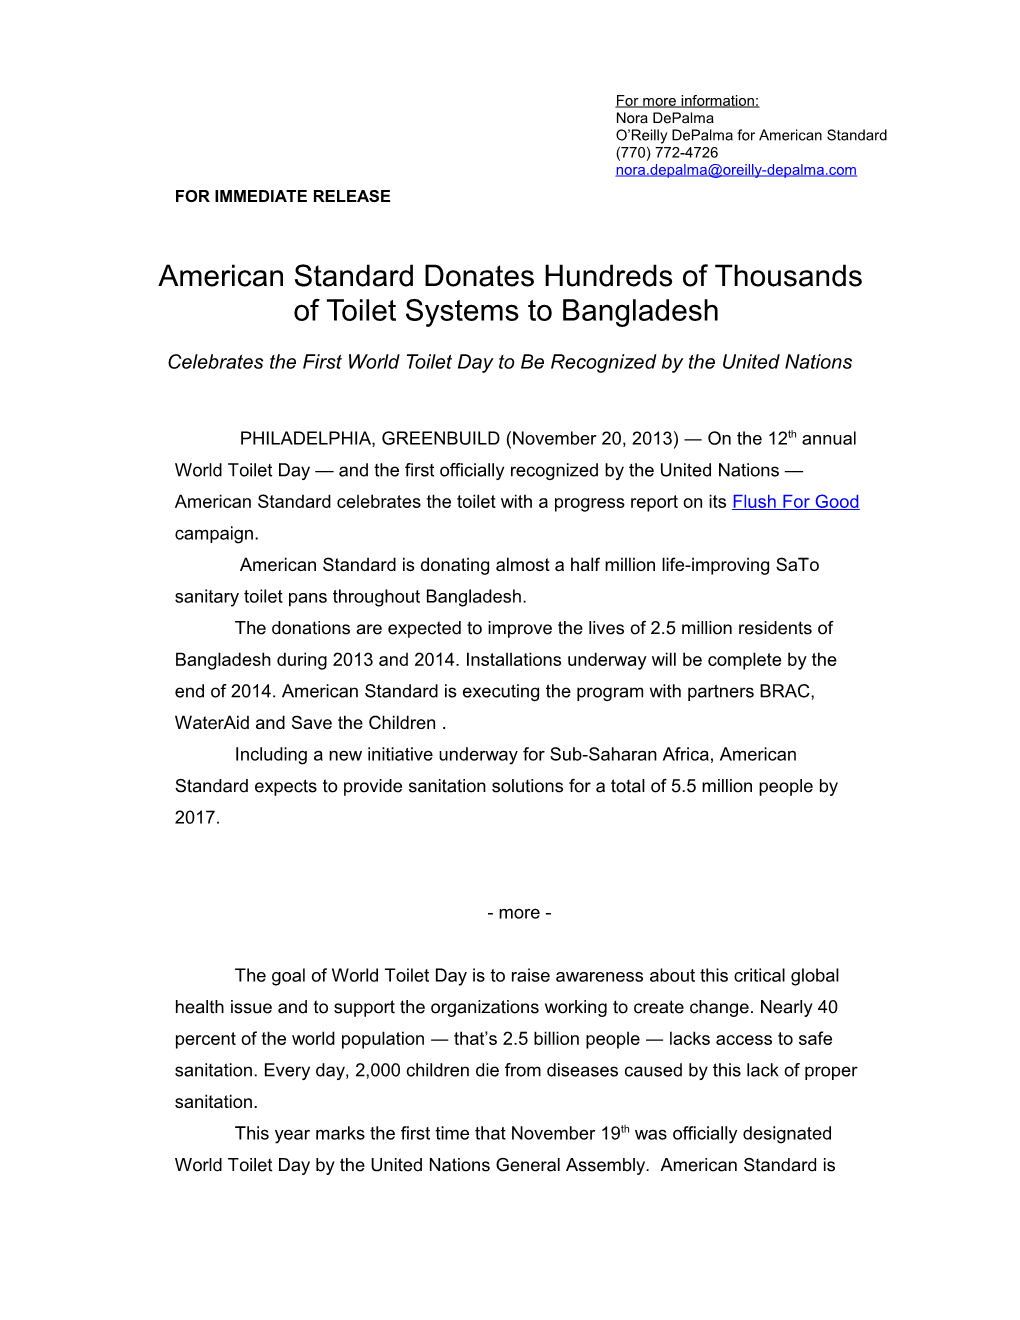 American Standard Donates Thousands of Toilet Systems to Bangladesh Through Flush For